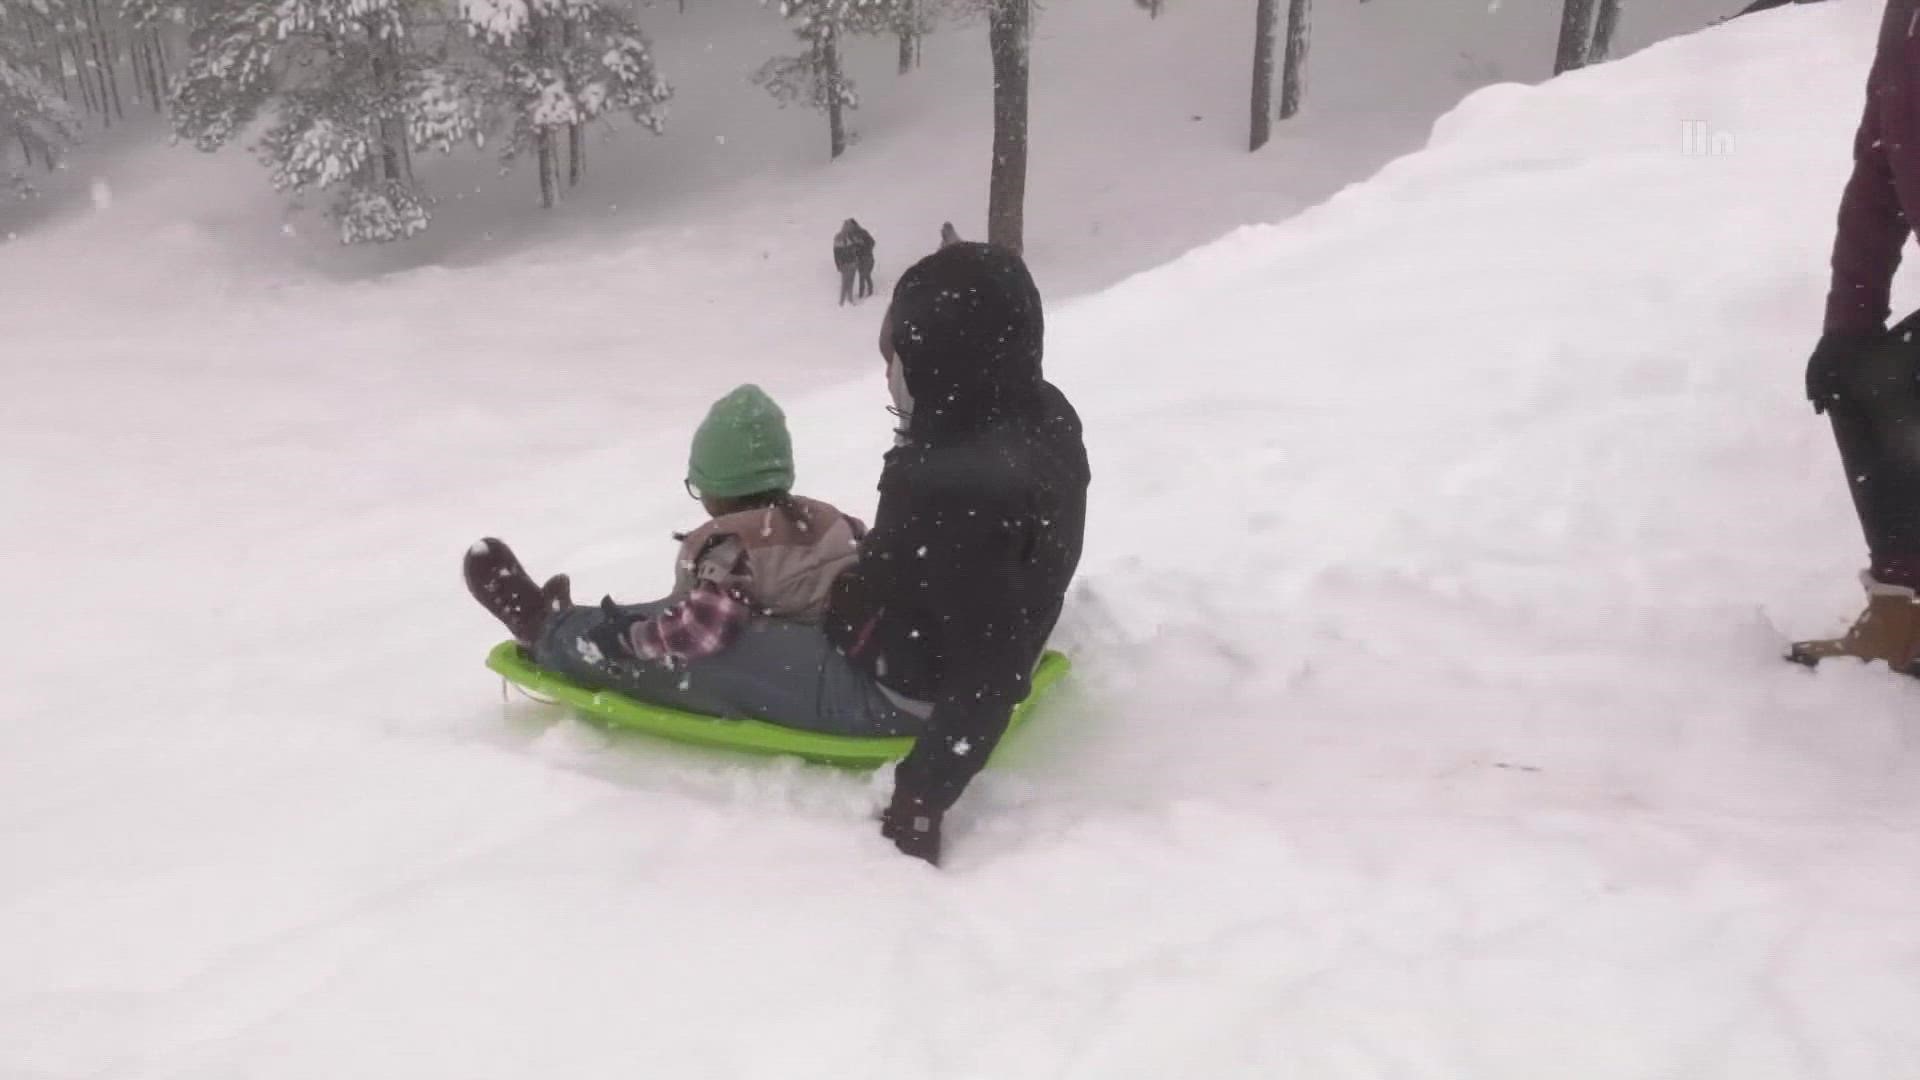 Snow is falling in Arizona’s high country. In Flagstaff people are coming out to enjoy the fresh powder.